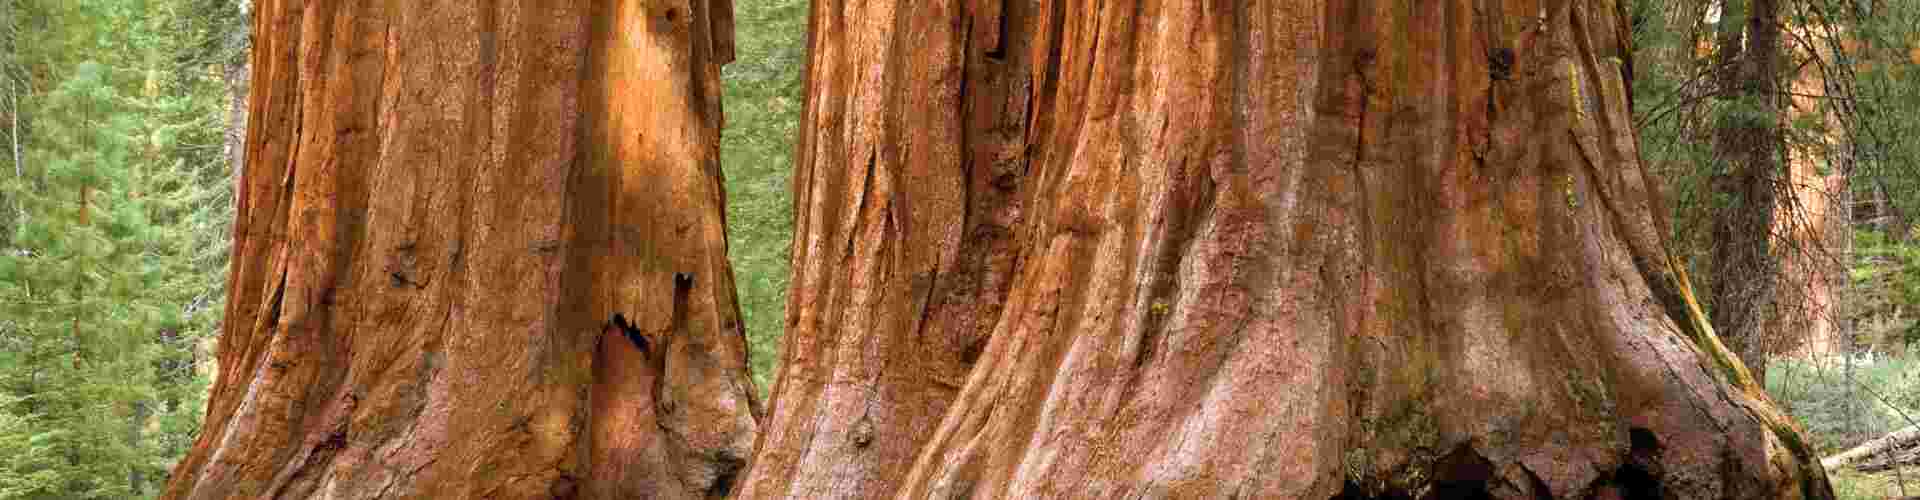 Giant Sequoia trees in Yosemite National Park